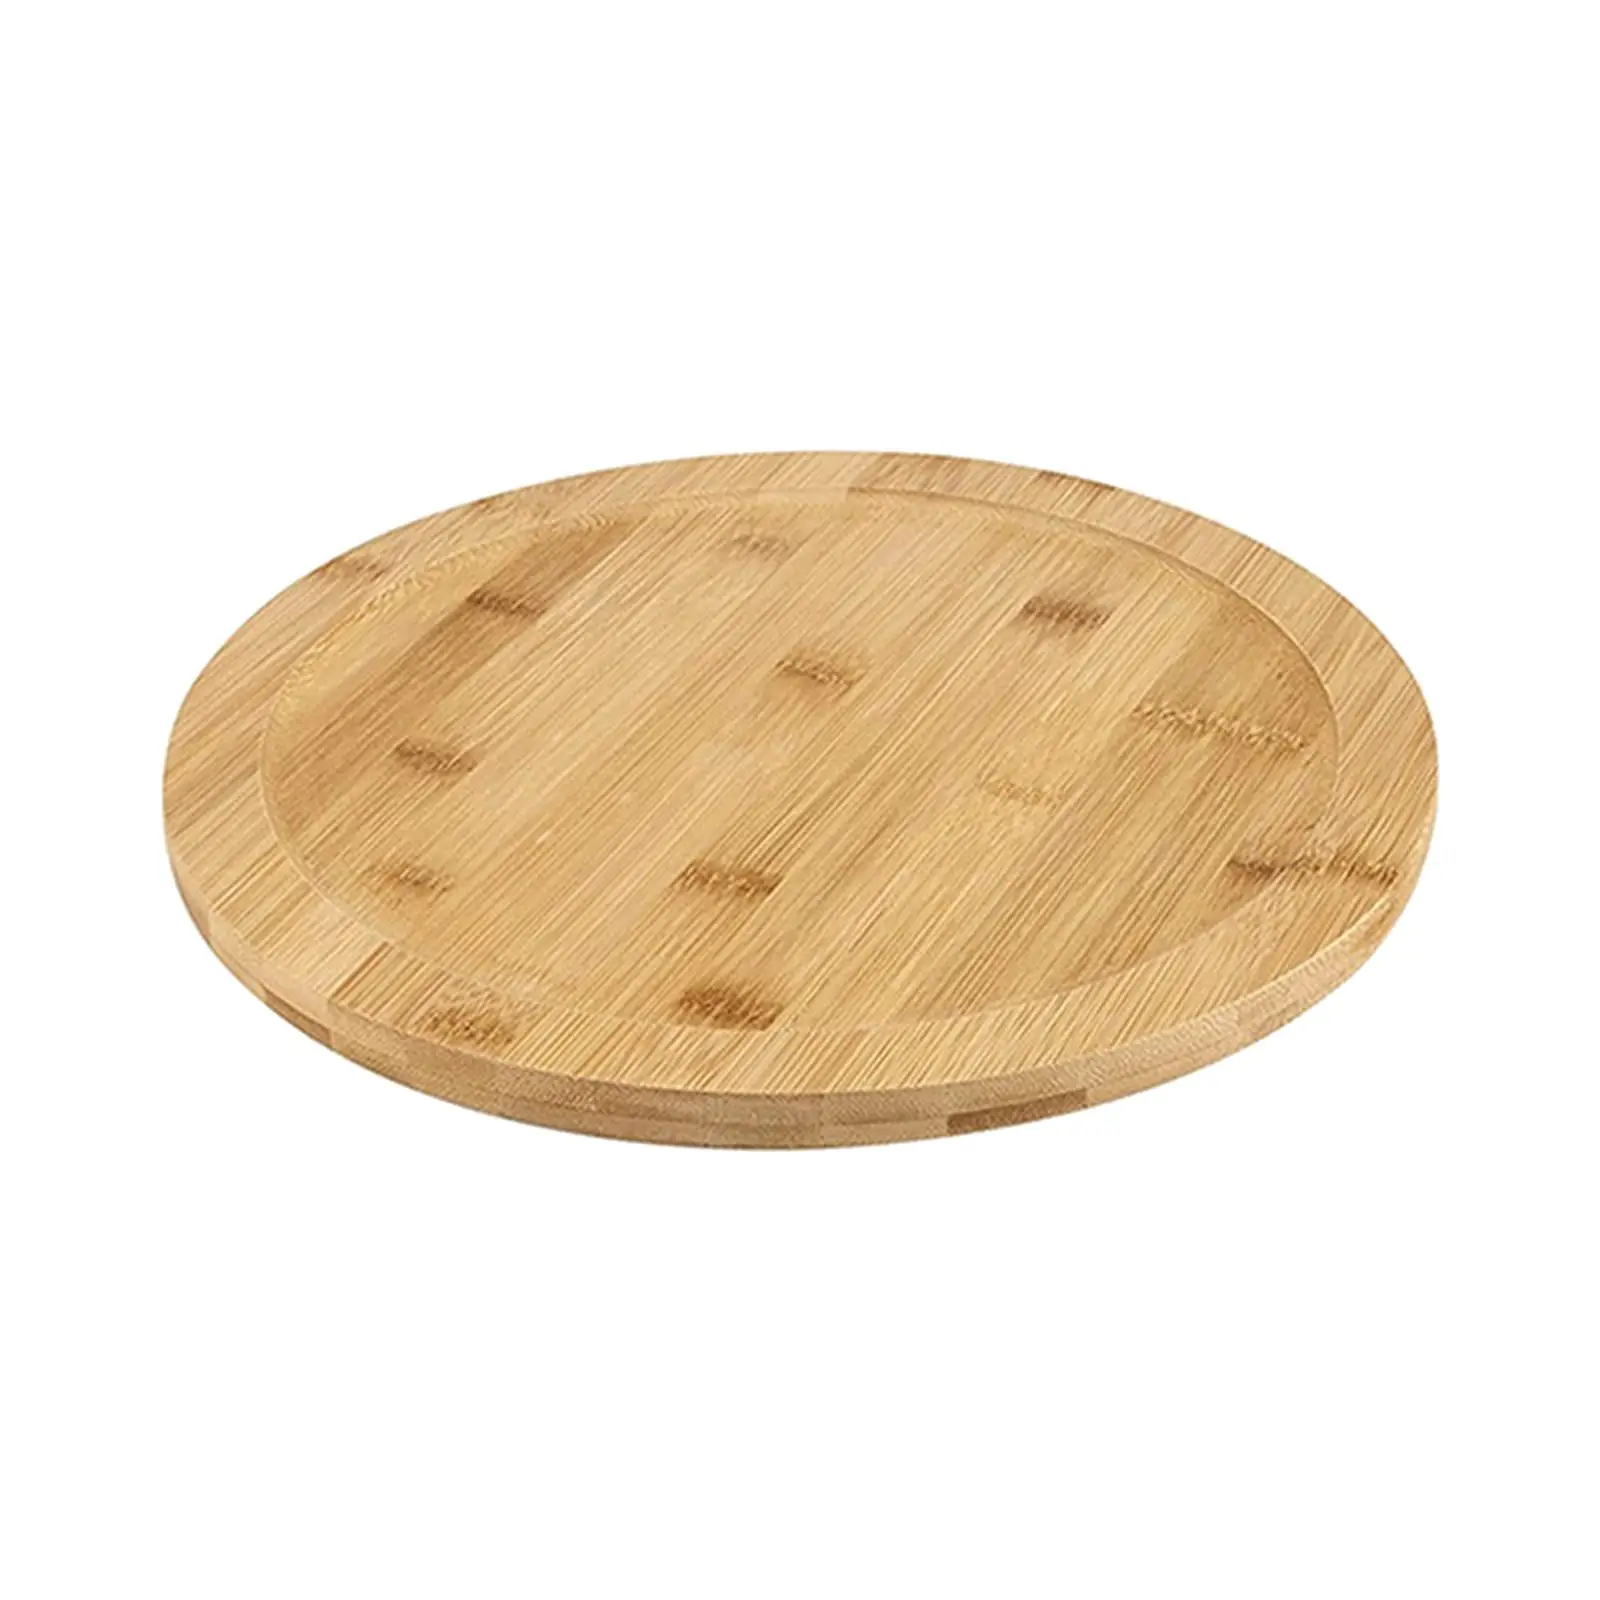 Rotating Base Multipurpose Cake Stand Swivel Plate Serving Plate for Kitchen Countertop Pantry Home Dining Table Cabinet